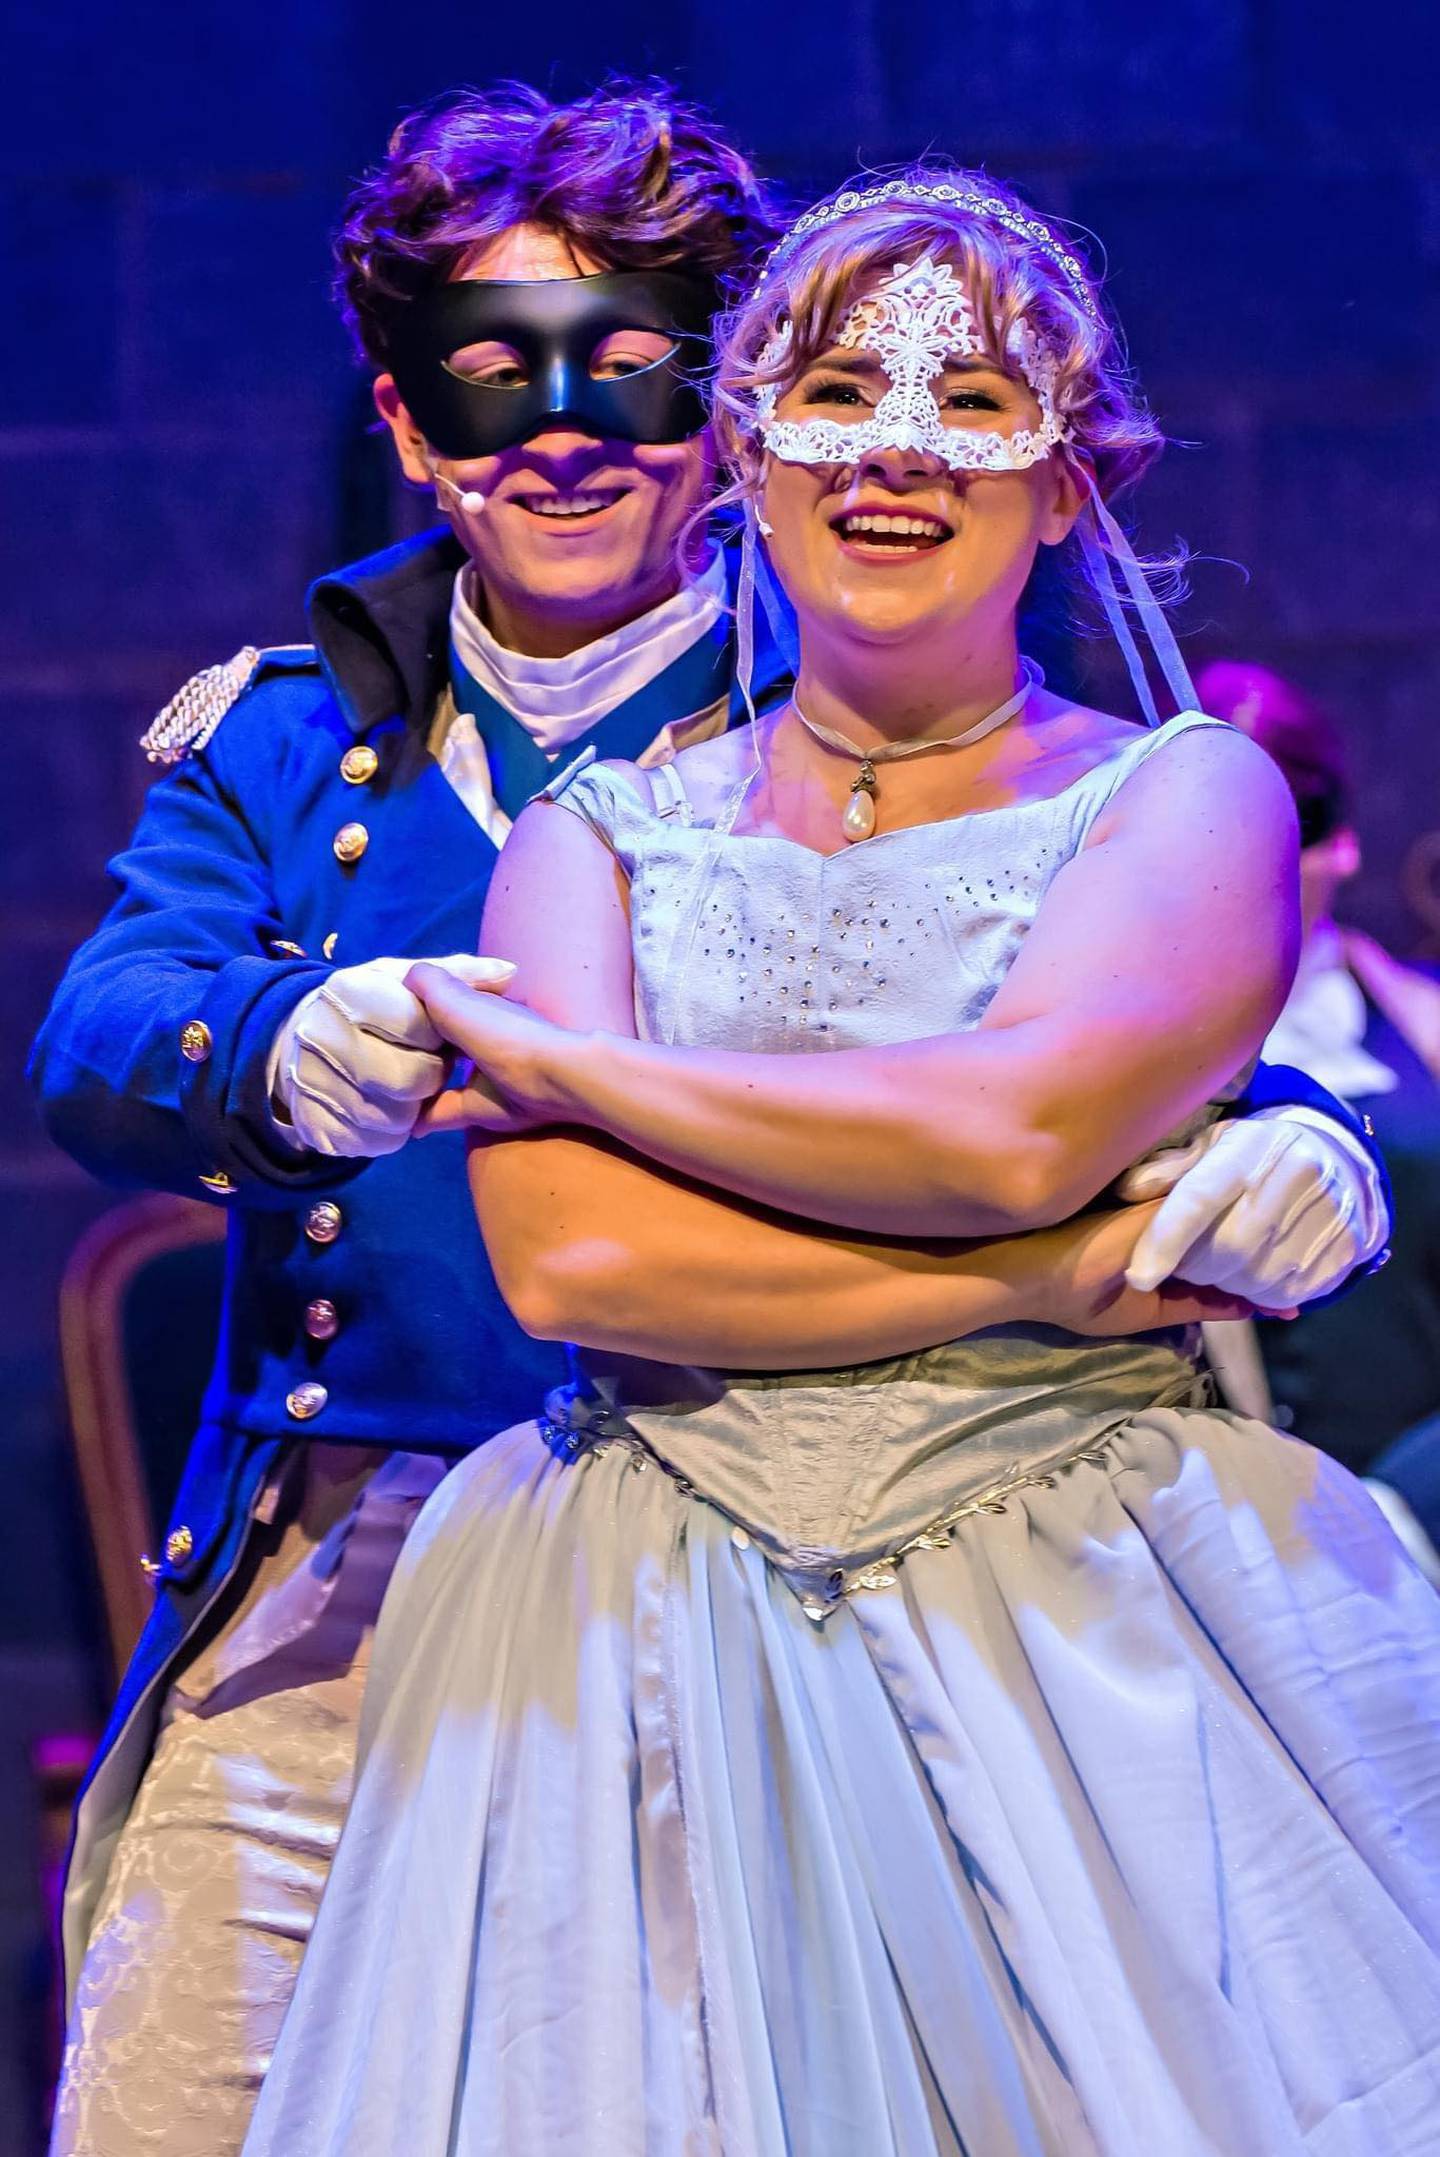 The prince and Cinderella in Theatre 121's production of the Rodgers and Hammerstein musical "Cinderella."